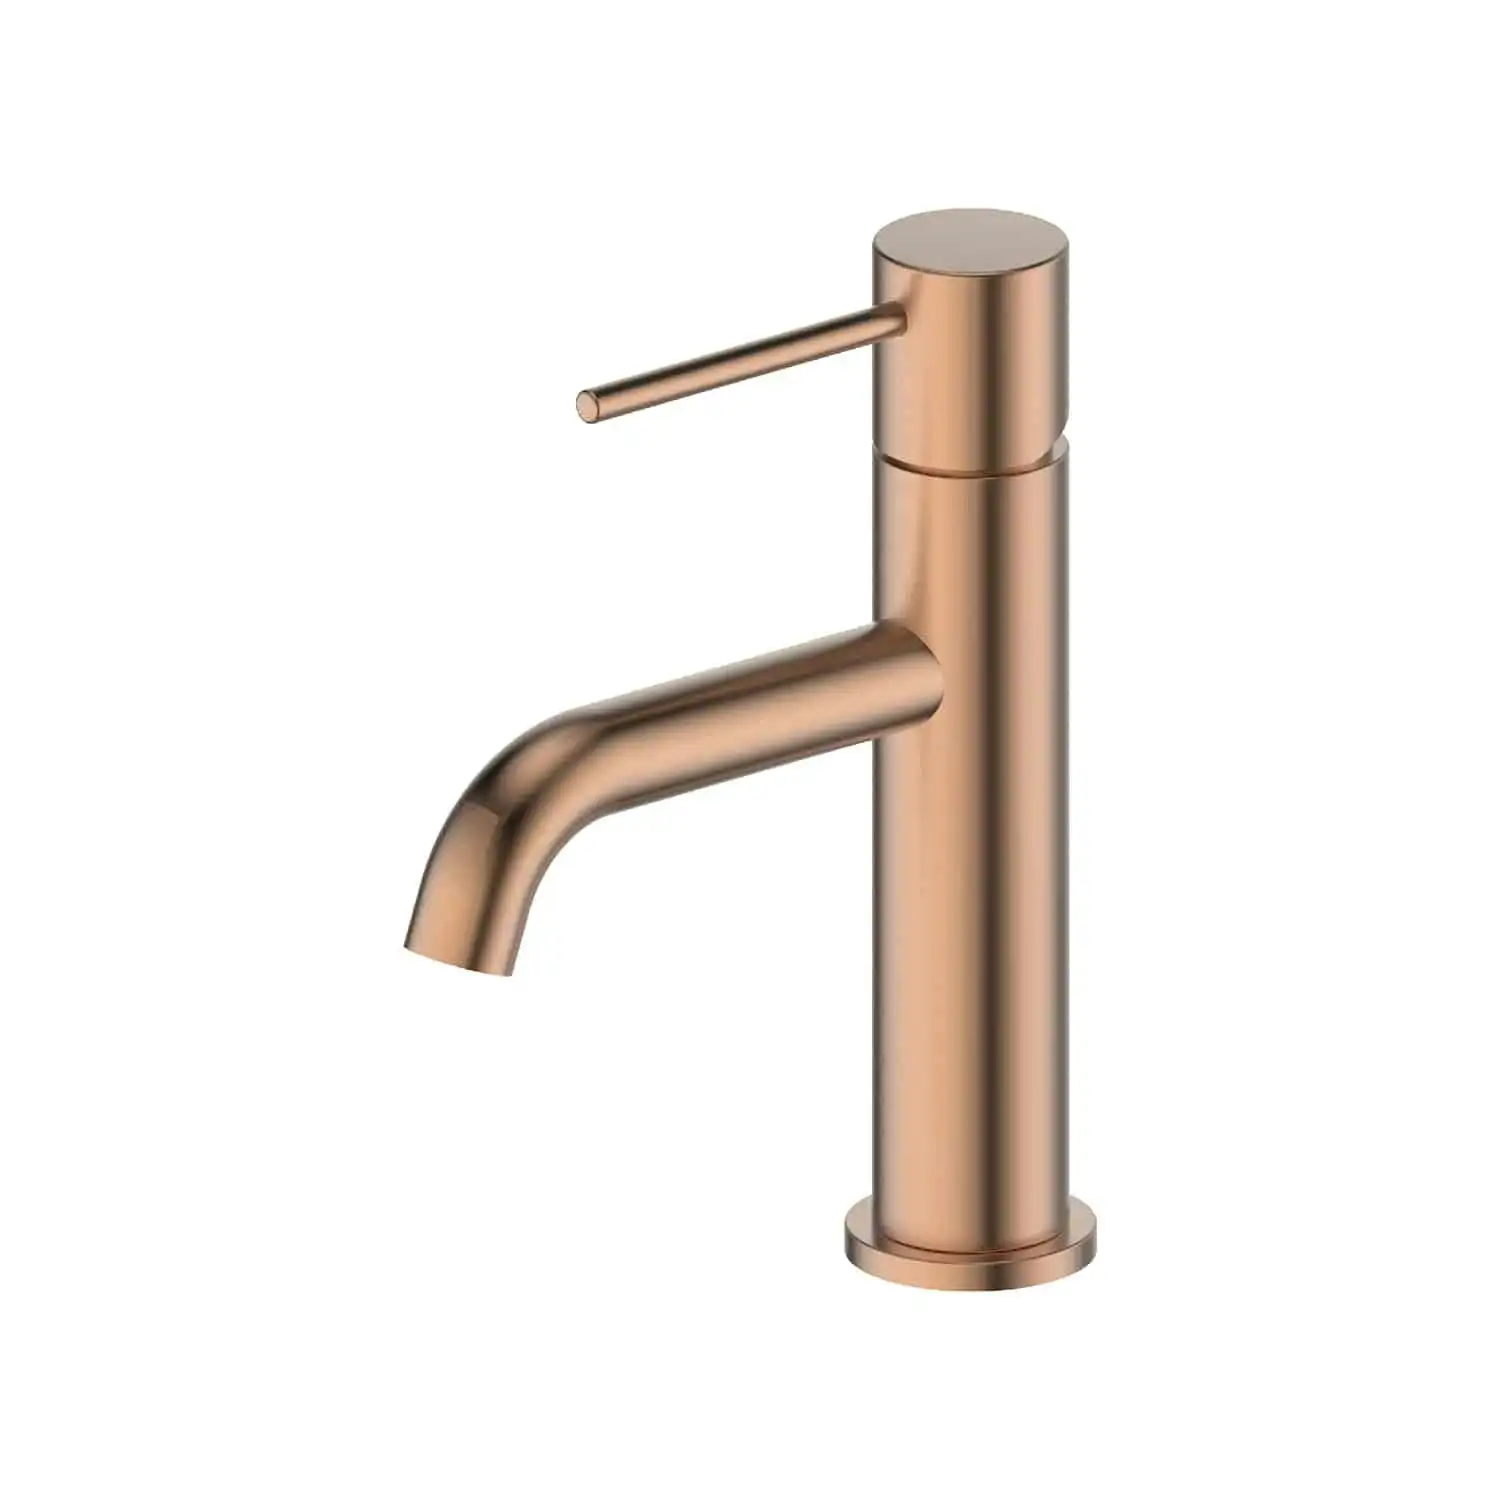 Greens Gisele Basin Mixer PVD Brushed Copper 18402558